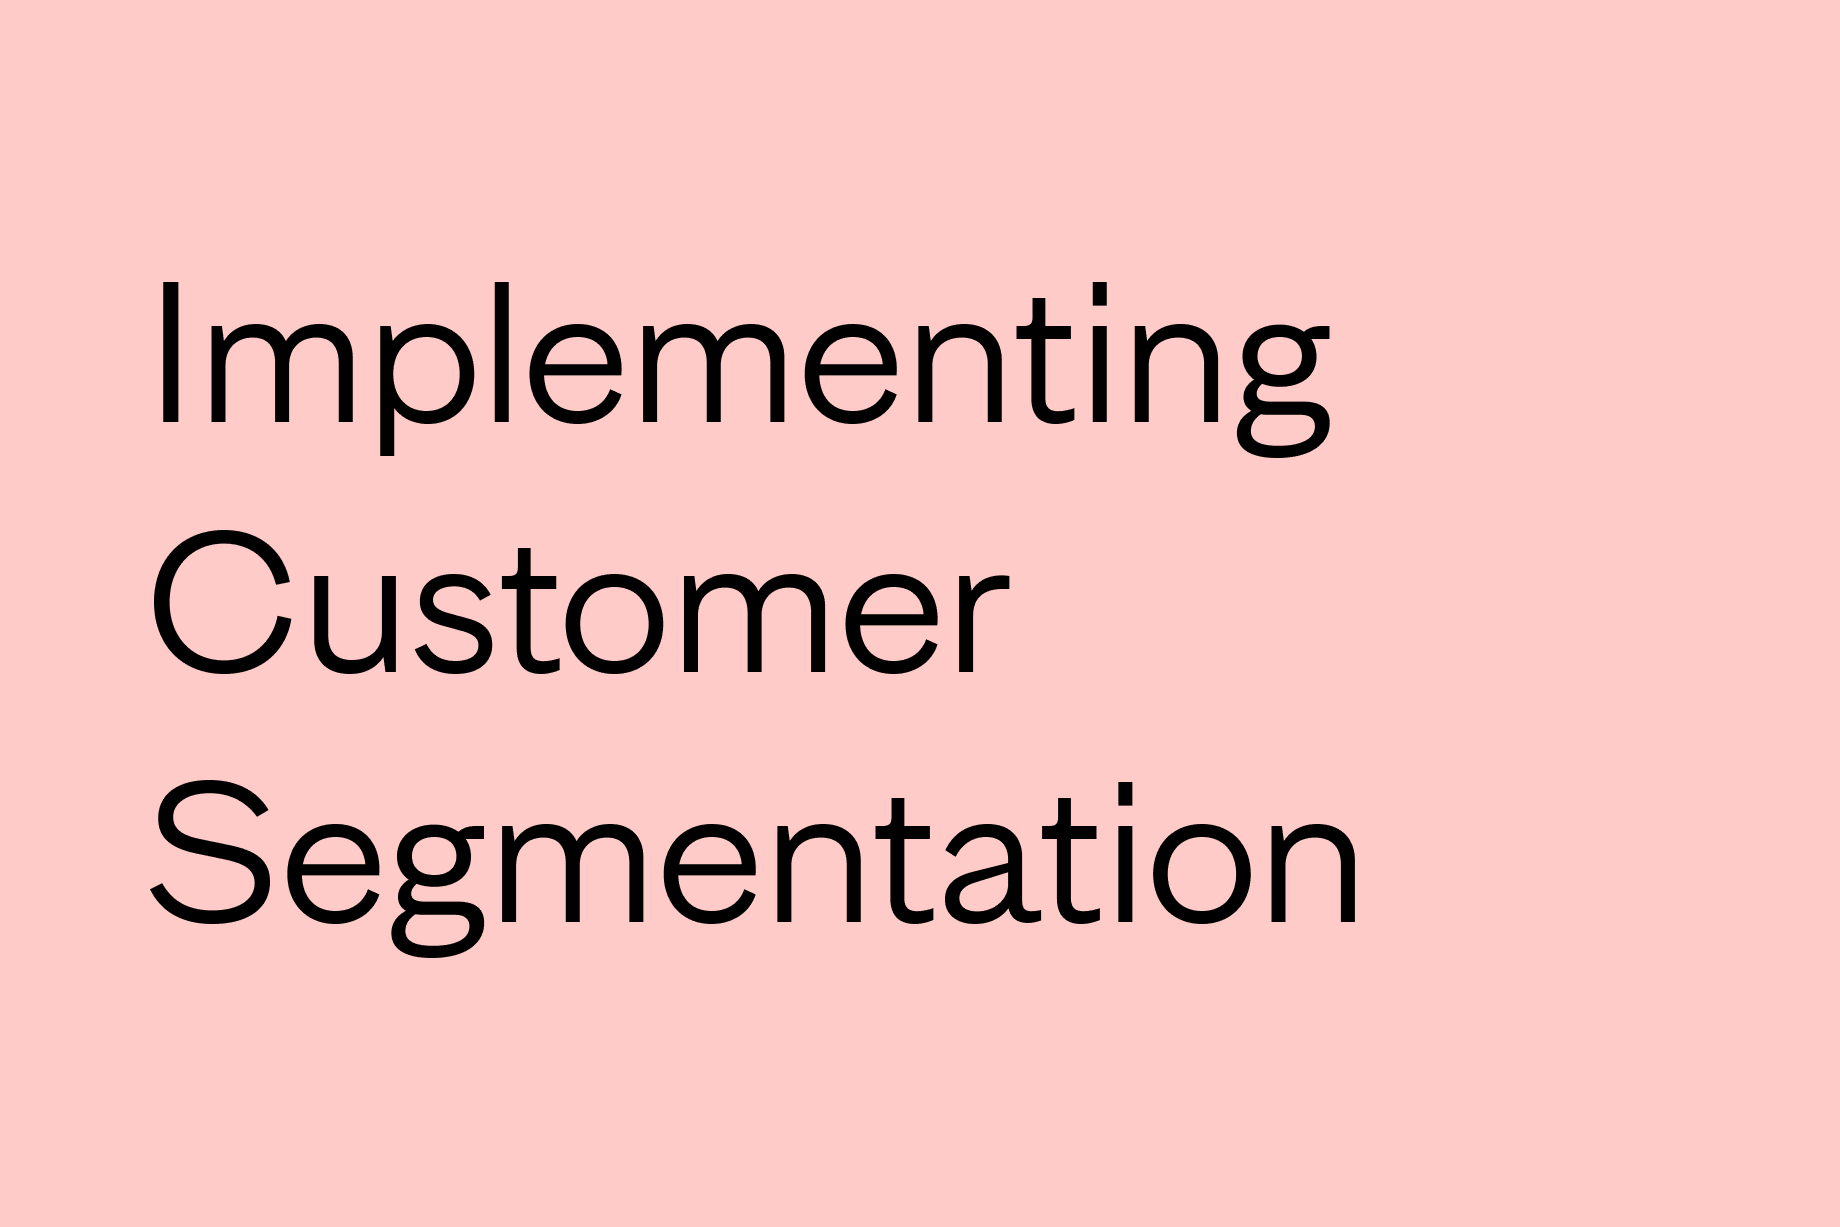 6 Common Hurdles Businesses Face when Implementing a Customer Segmentation Strategy